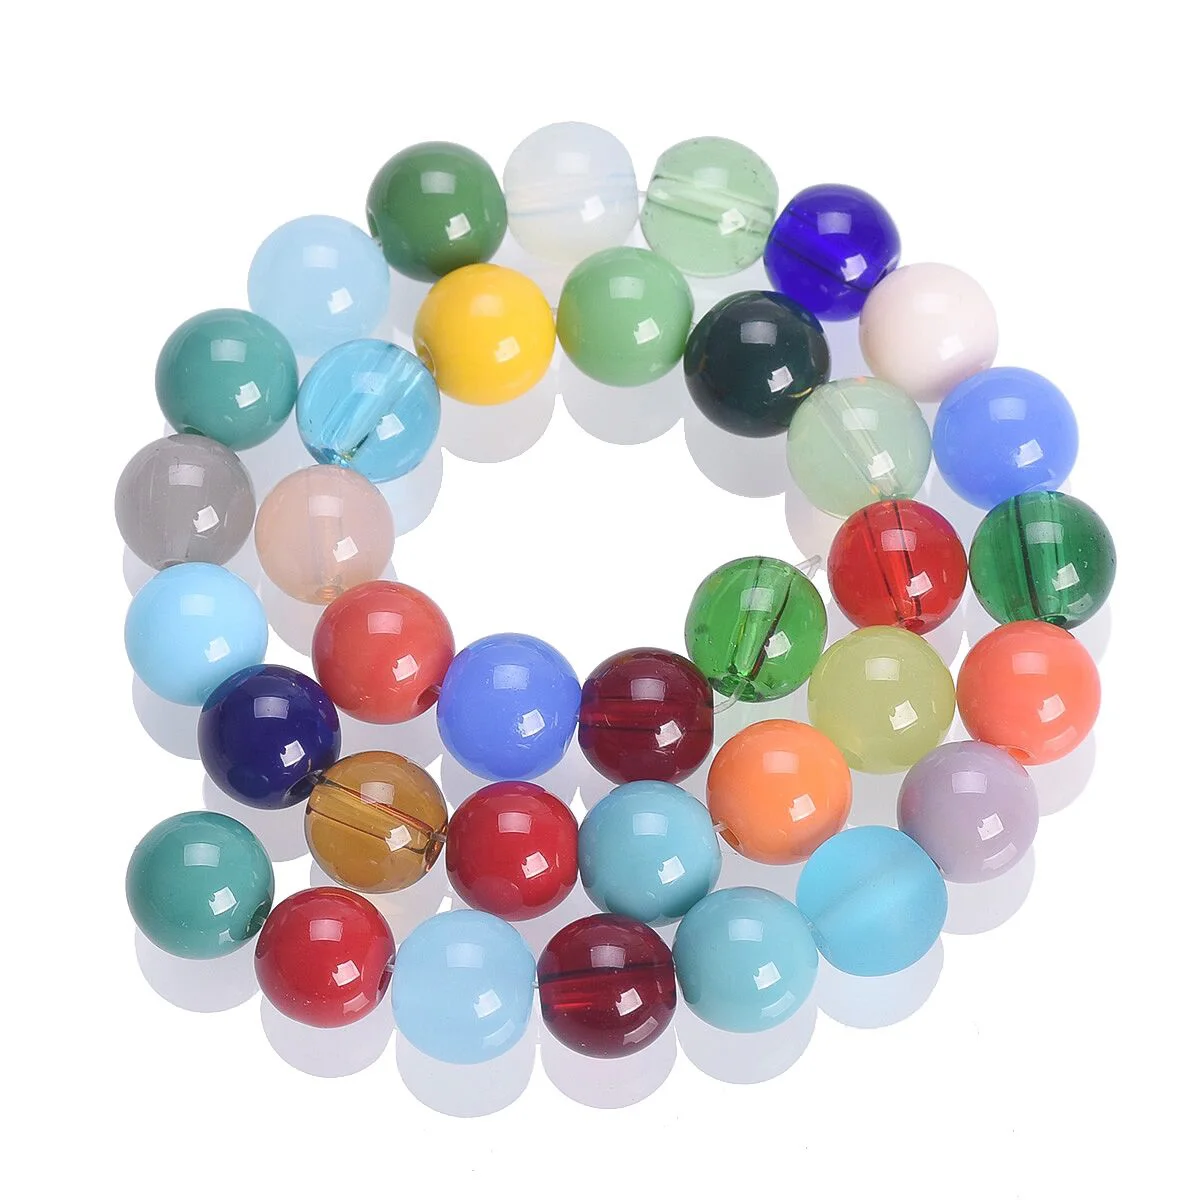 30pcs Round 8mm Opaque Crystal Glass Loose Beads For Jewelry Making DIY Bracelet Findings